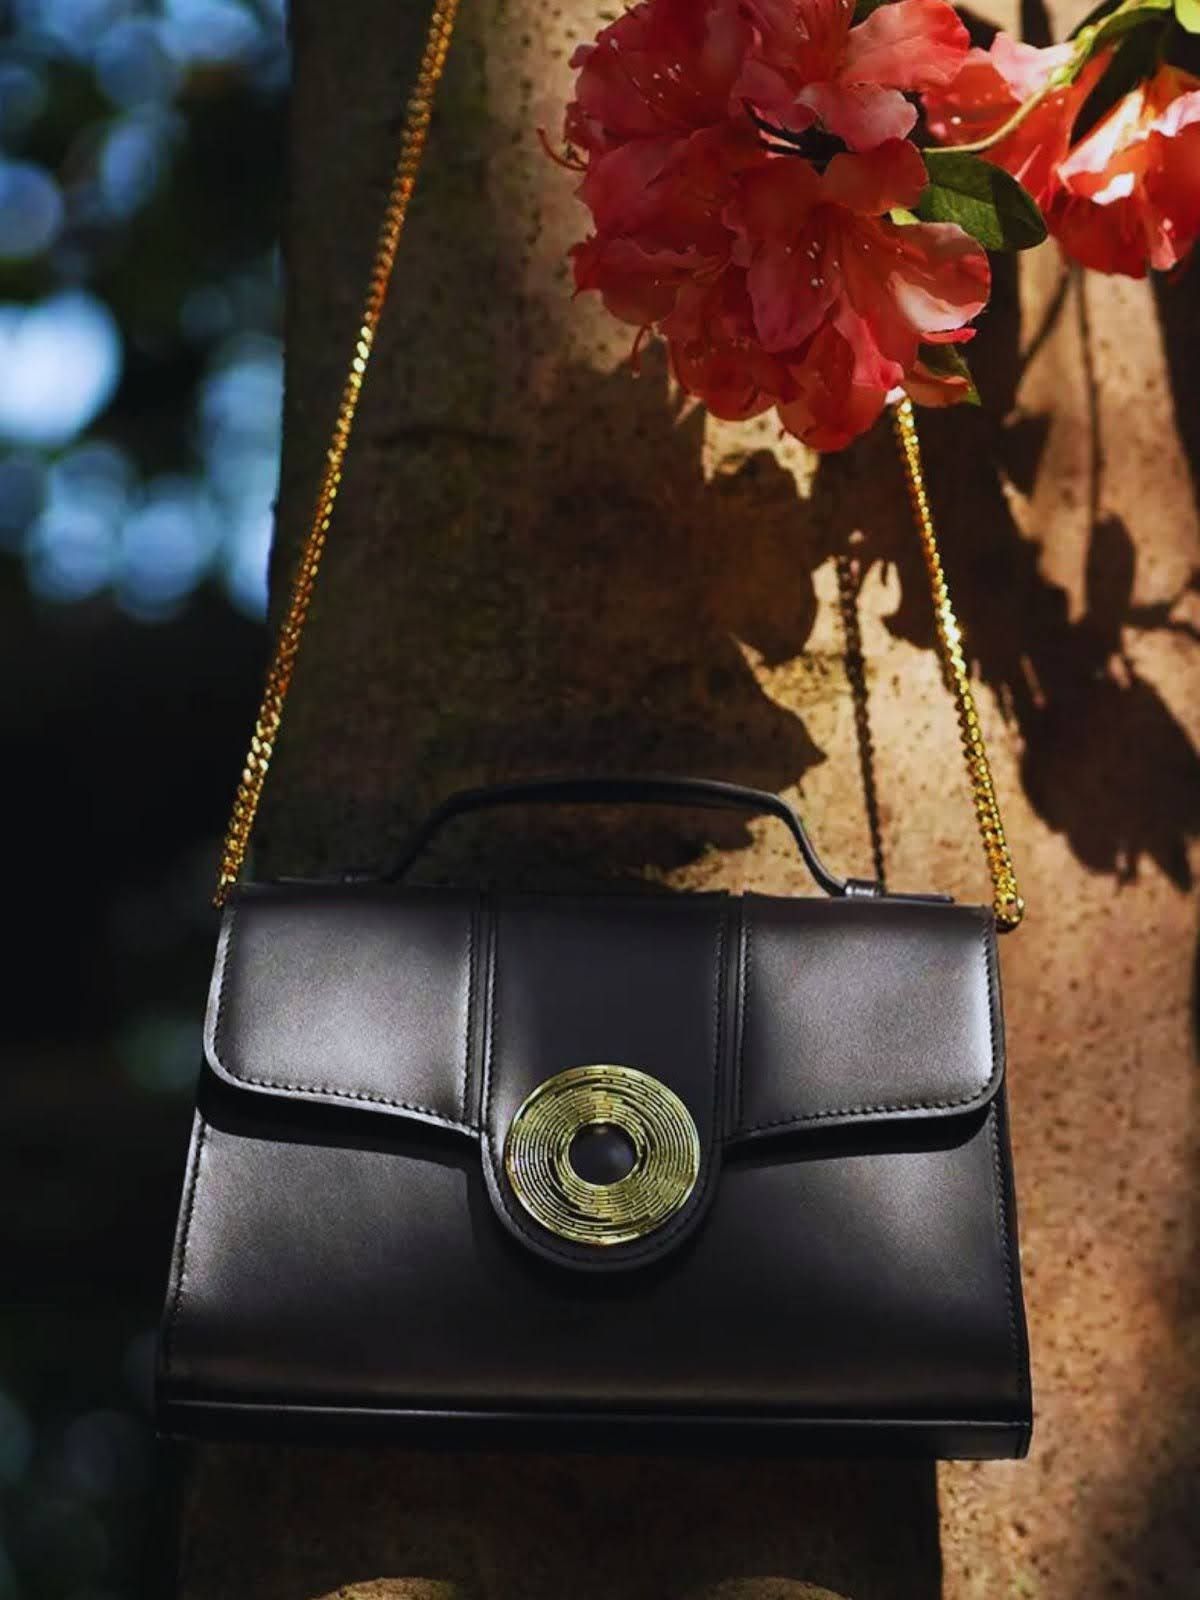 Beautiful Aranyani Aella Monogram Clutch in Obsidian shade with a tree and flower in the background